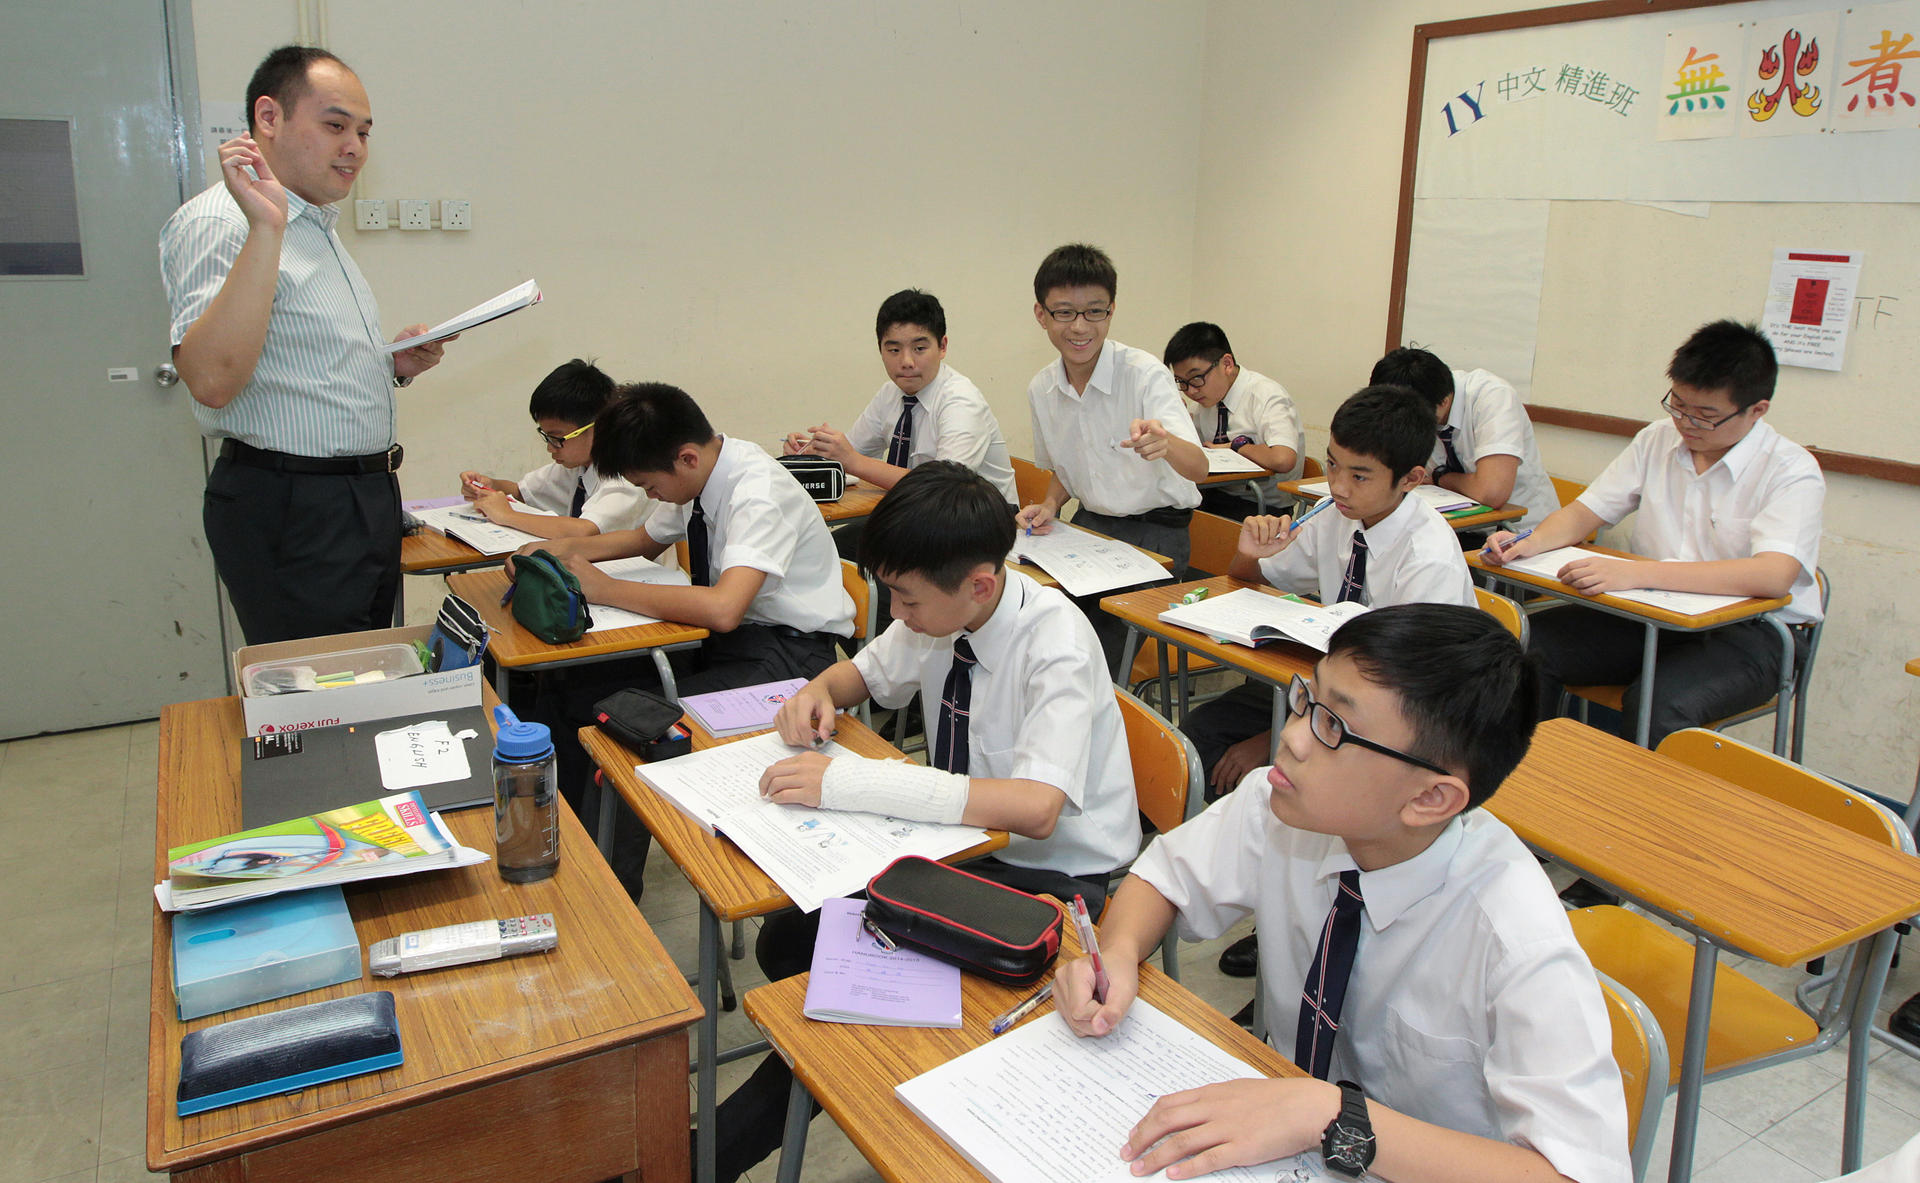 Eric Chung leads a class of 12 students at Wah Yan College. Small-class teaching allows for greater teamwork and more student interaction, experts say. Photo: Bruce Yan